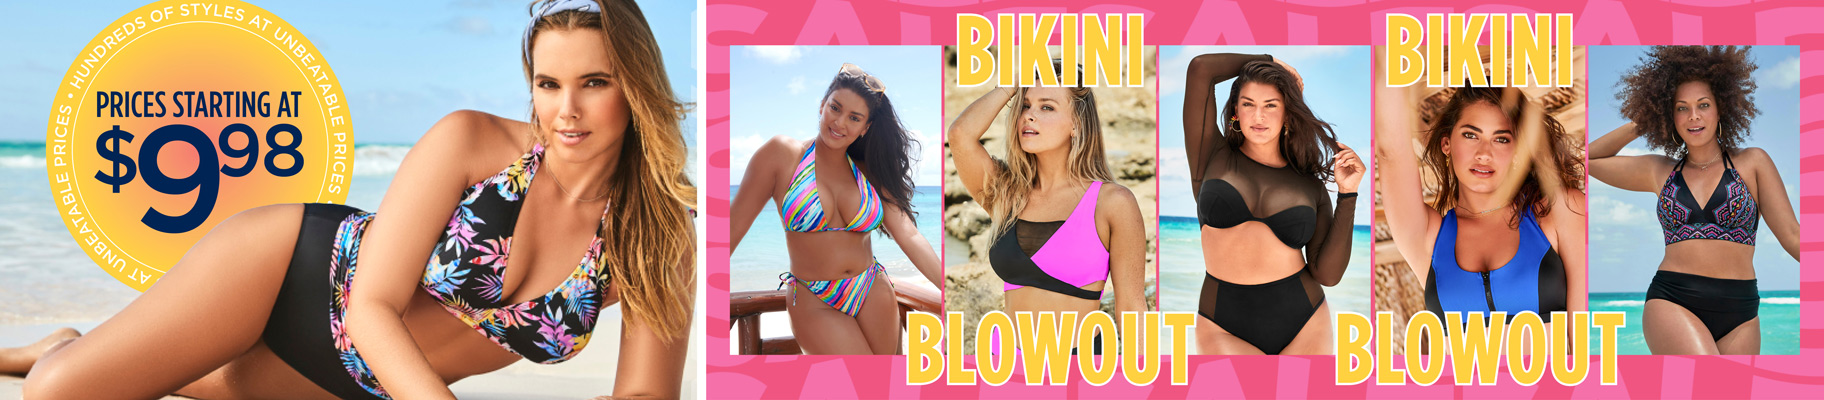 THE BIKINI BLOWOUT SALE! PRICES STARTING AT $9.98